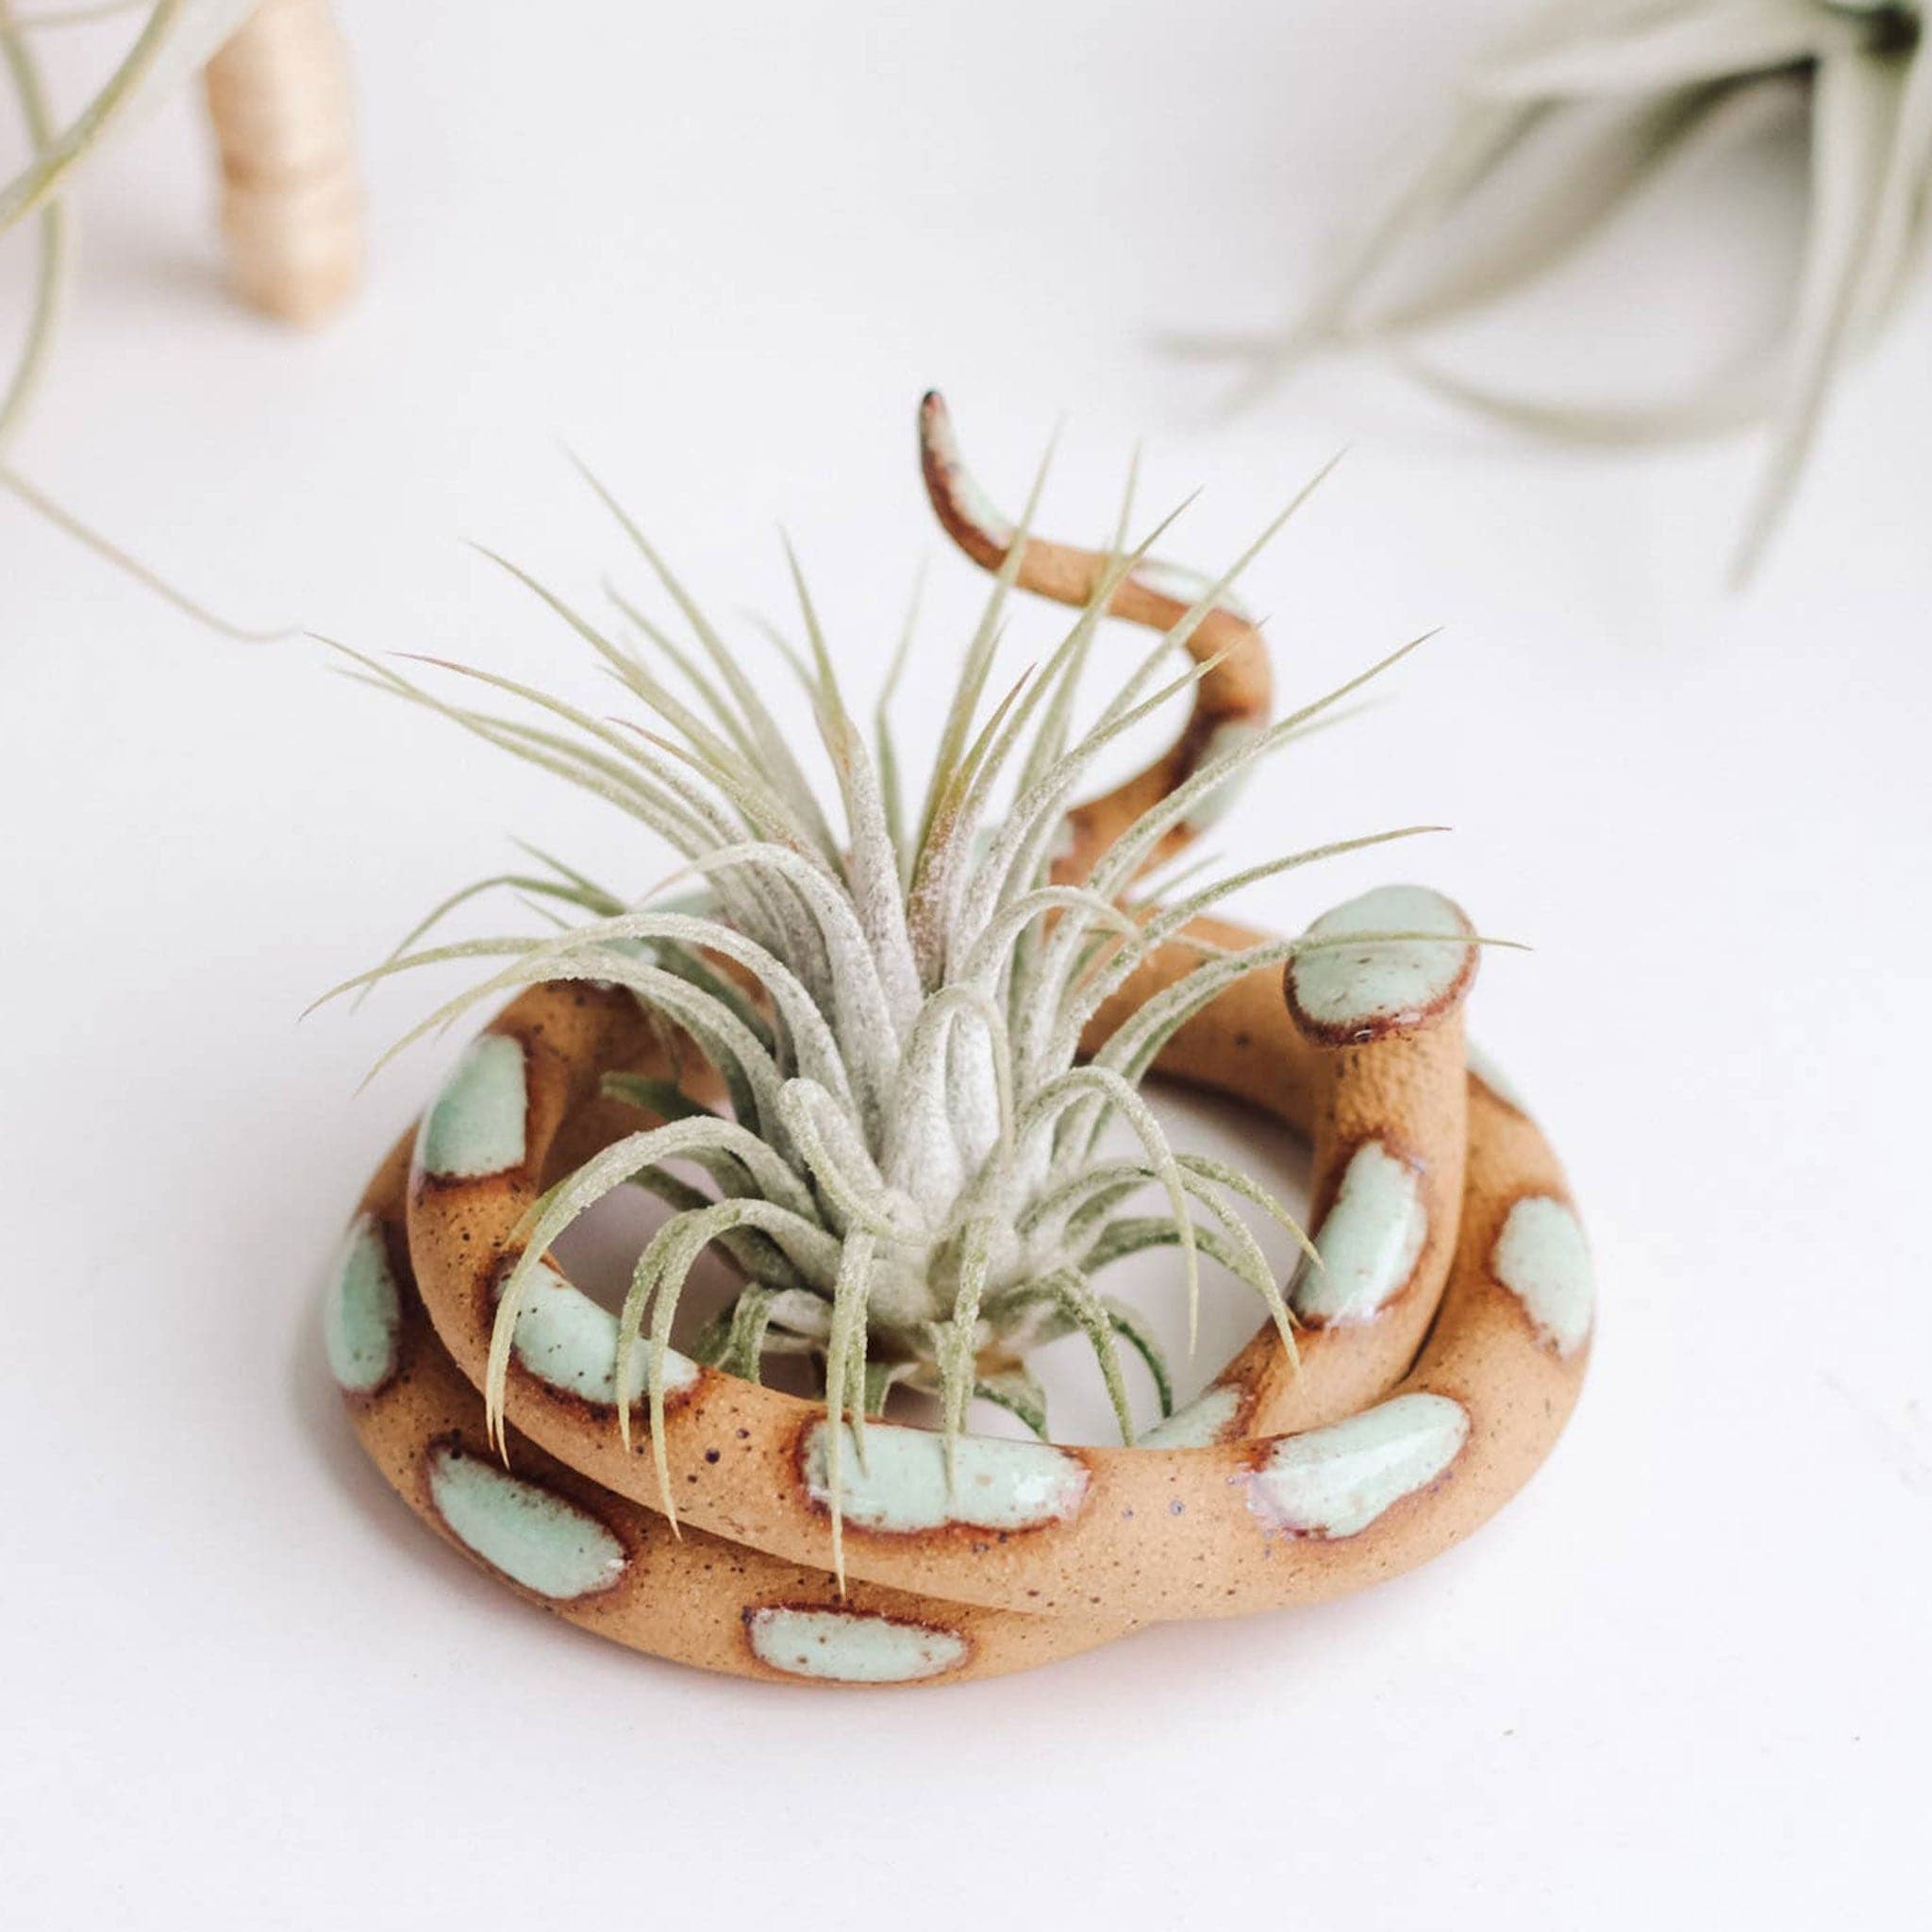 A small ceramic snake in a tan color with light teal spots coiled up and holds an airplant in the center. 